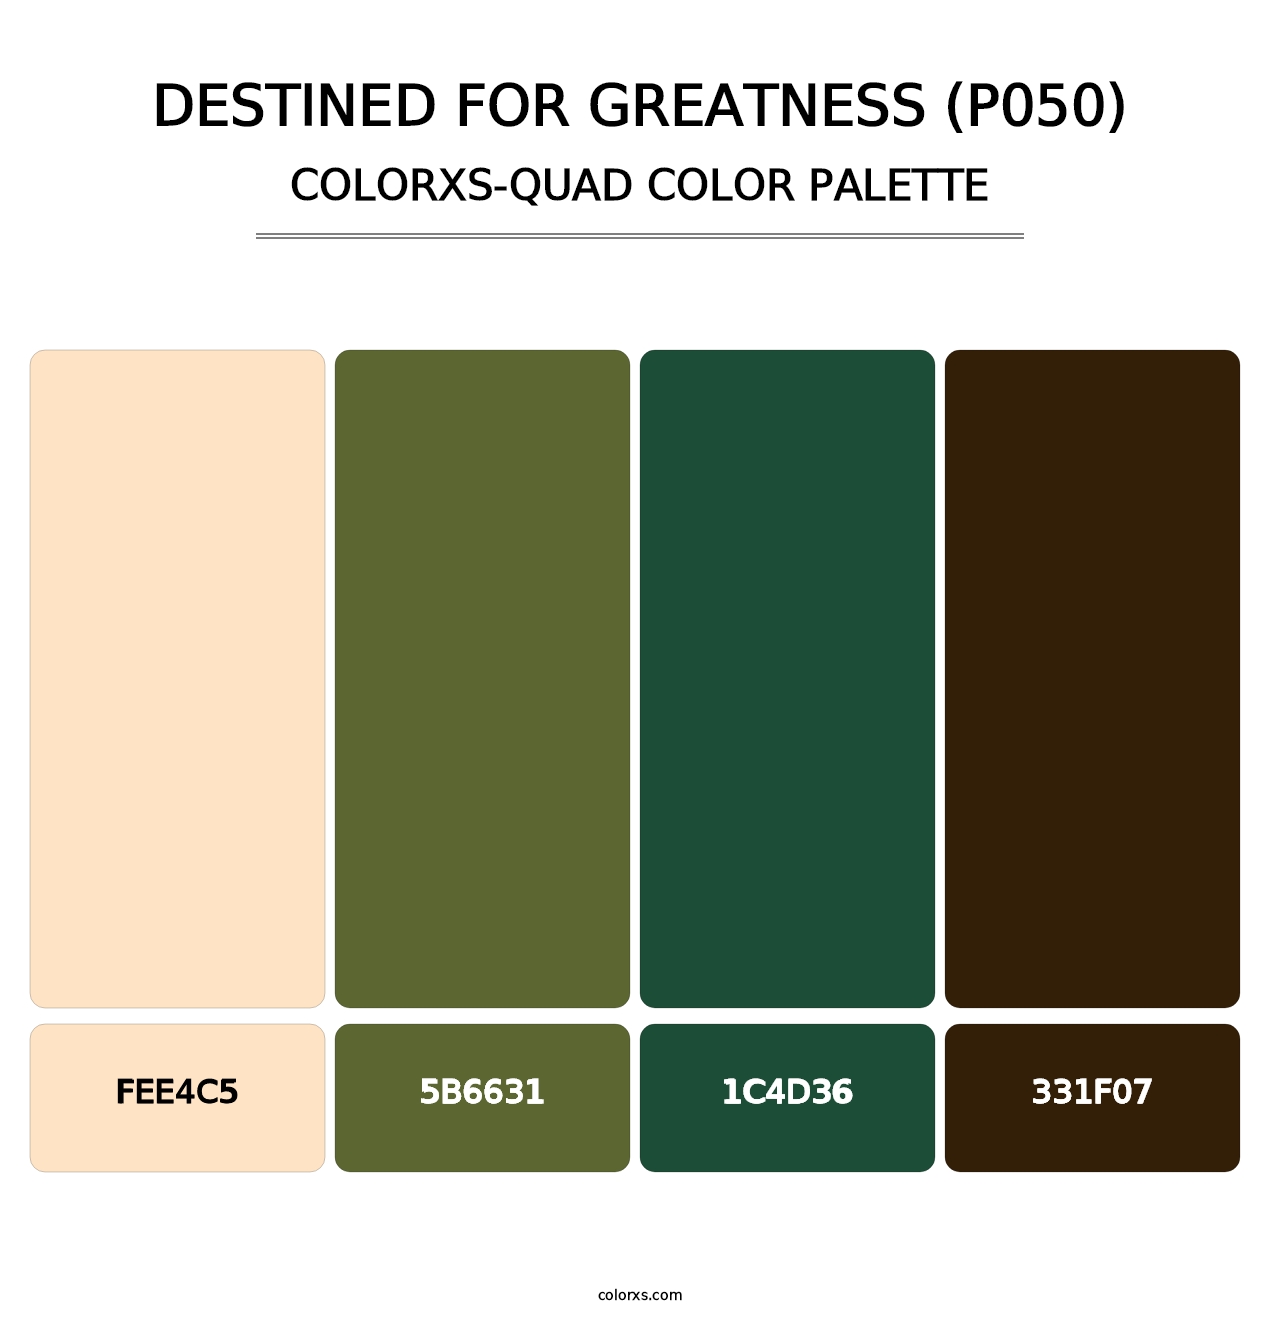 Destined for Greatness (P050) - Colorxs Quad Palette